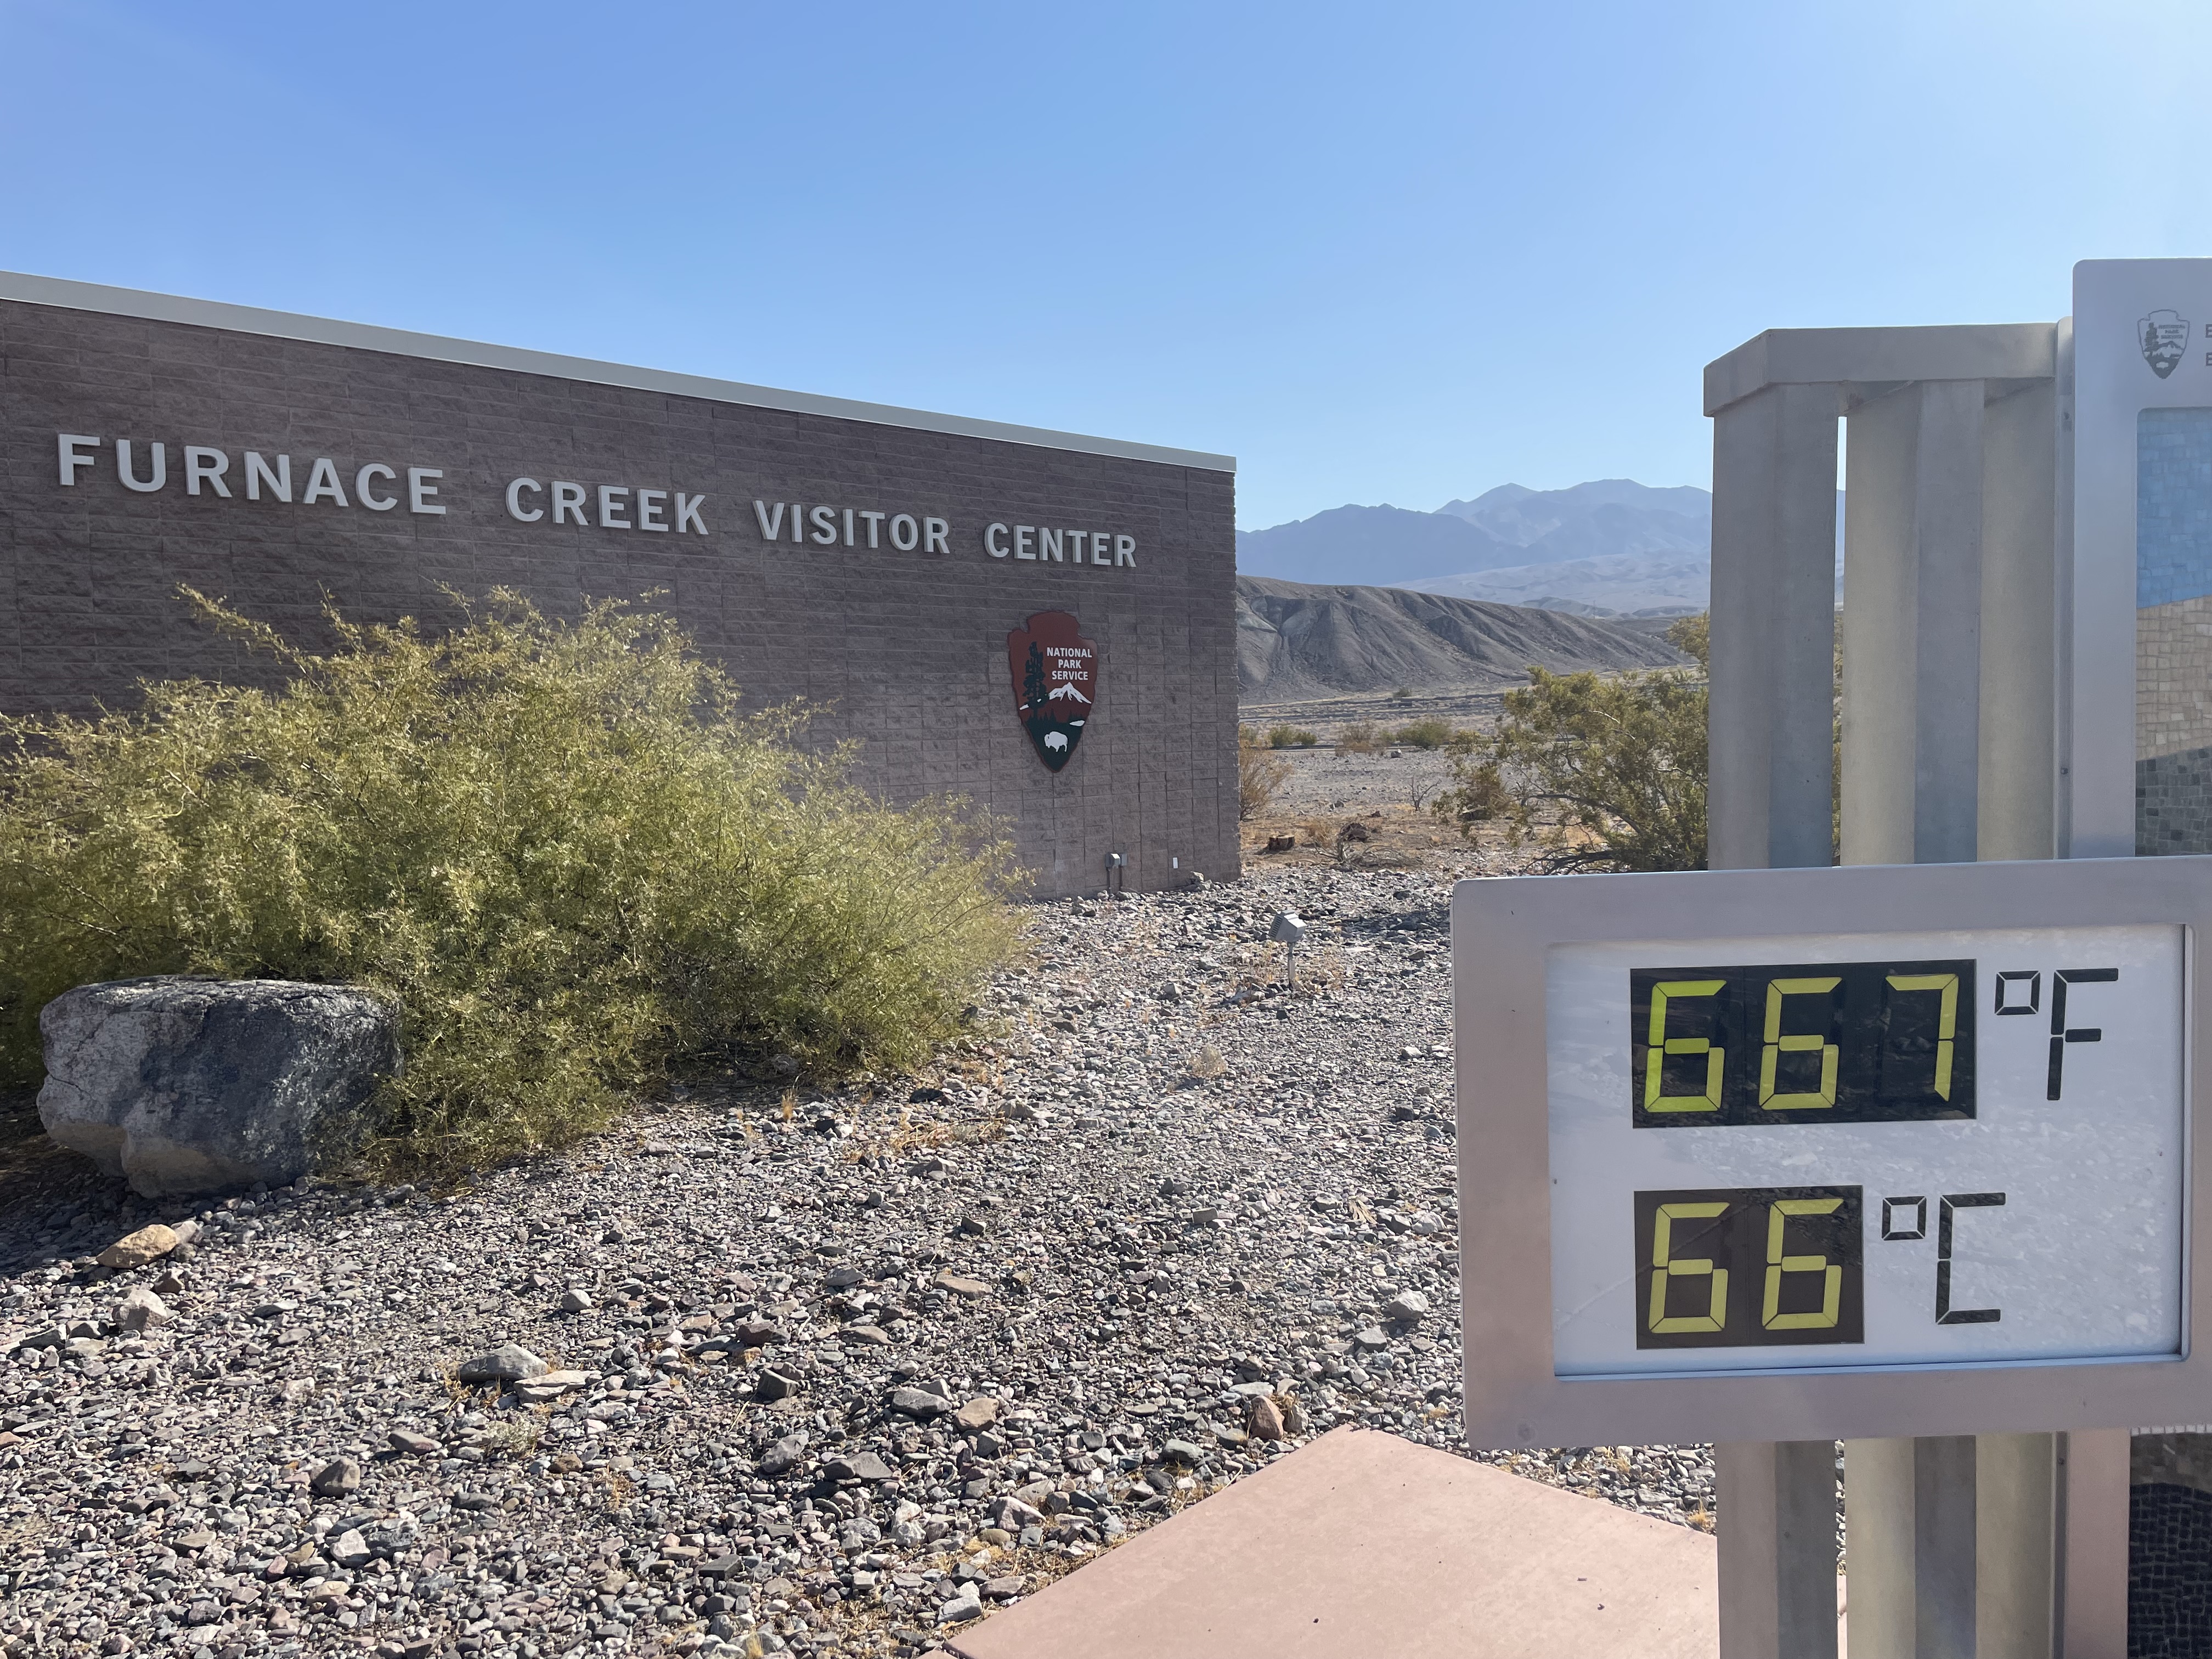 A large digital thermometer displays 667 in front of a gray building with name Furnace Creek Visitor Center.